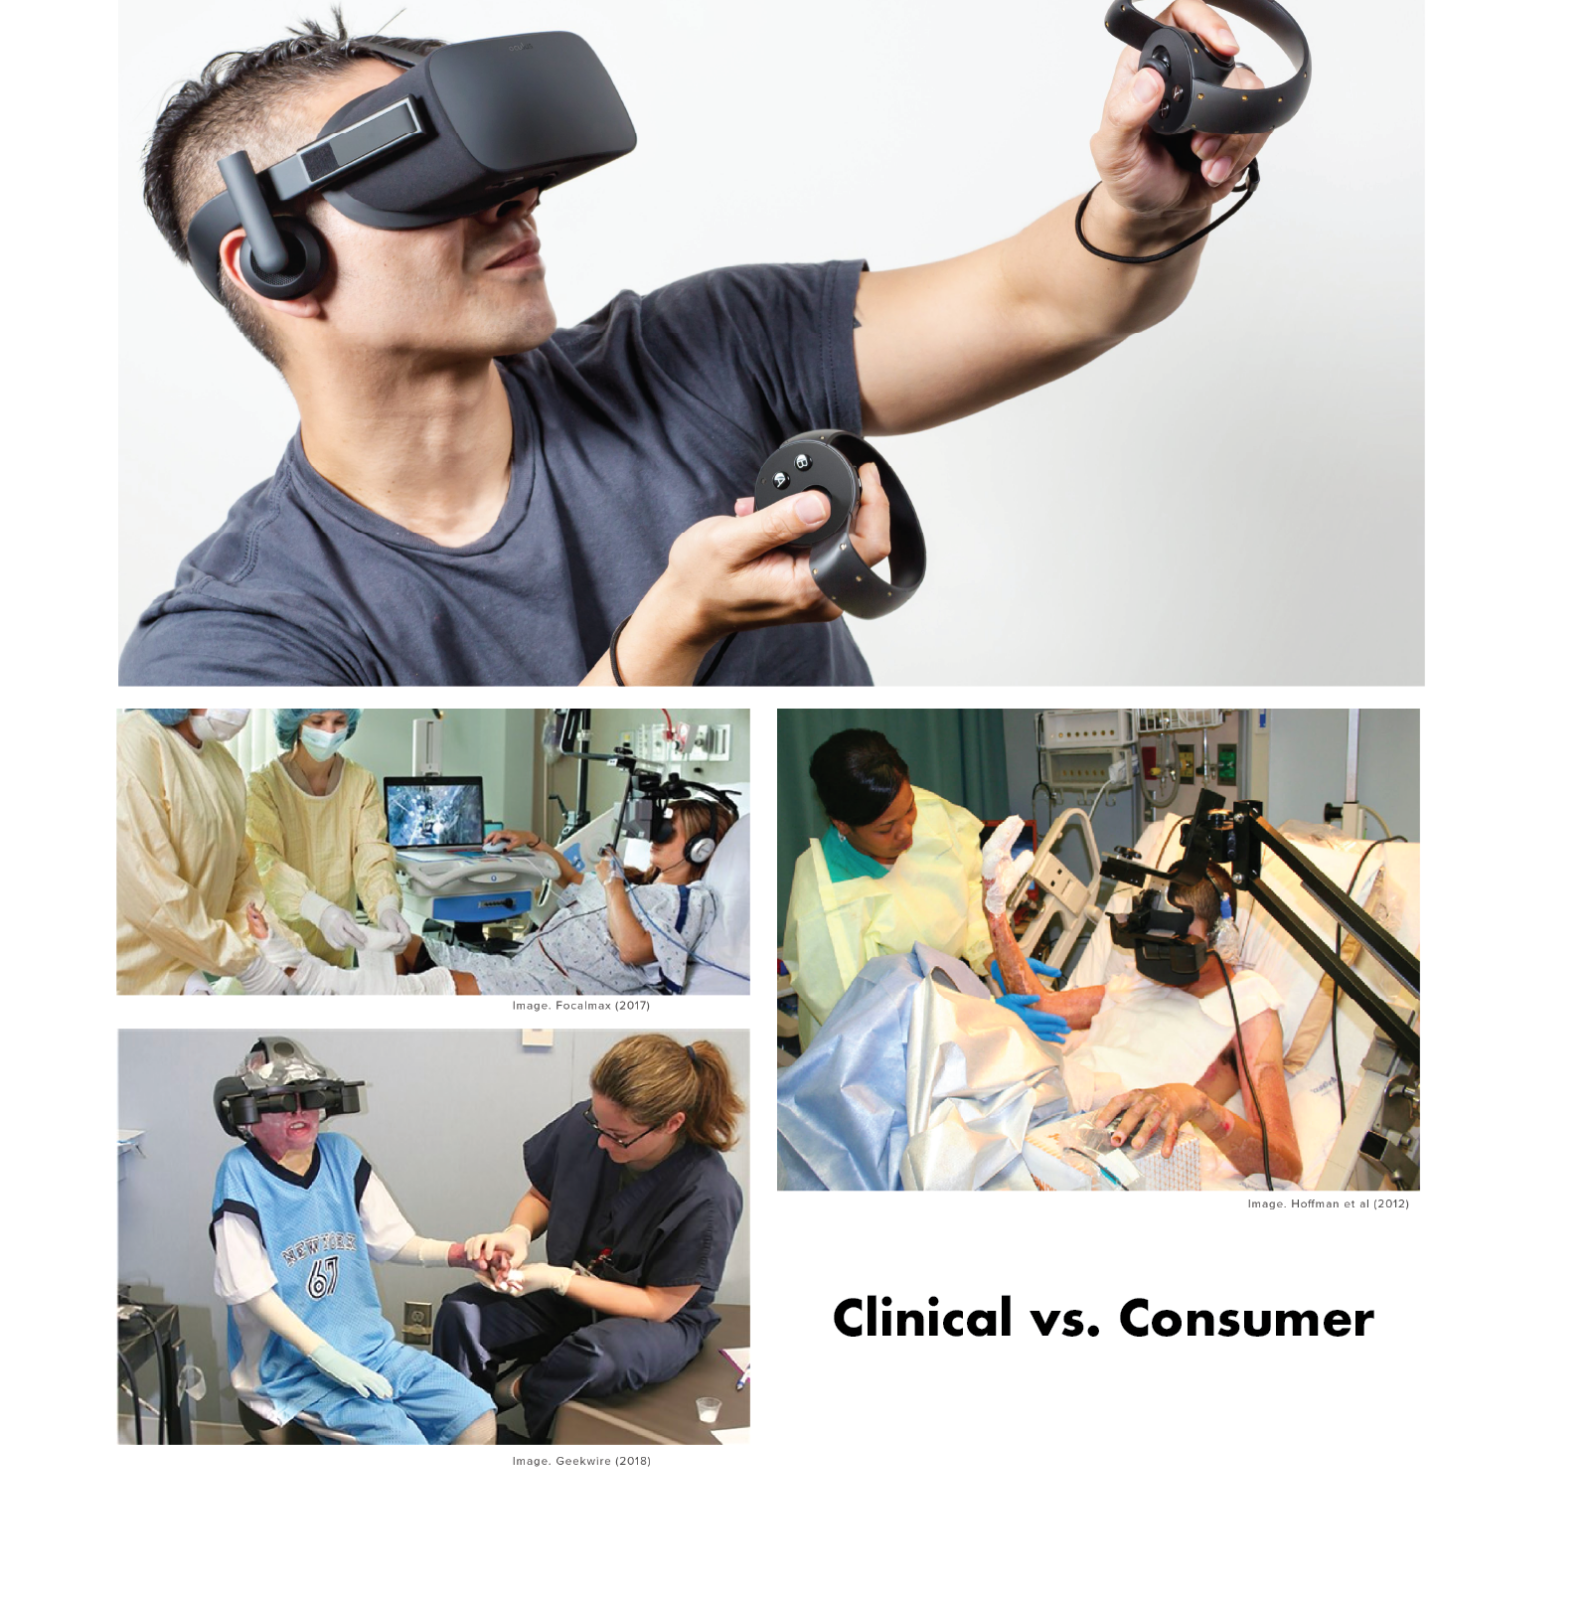 Consumer and clinical headsets